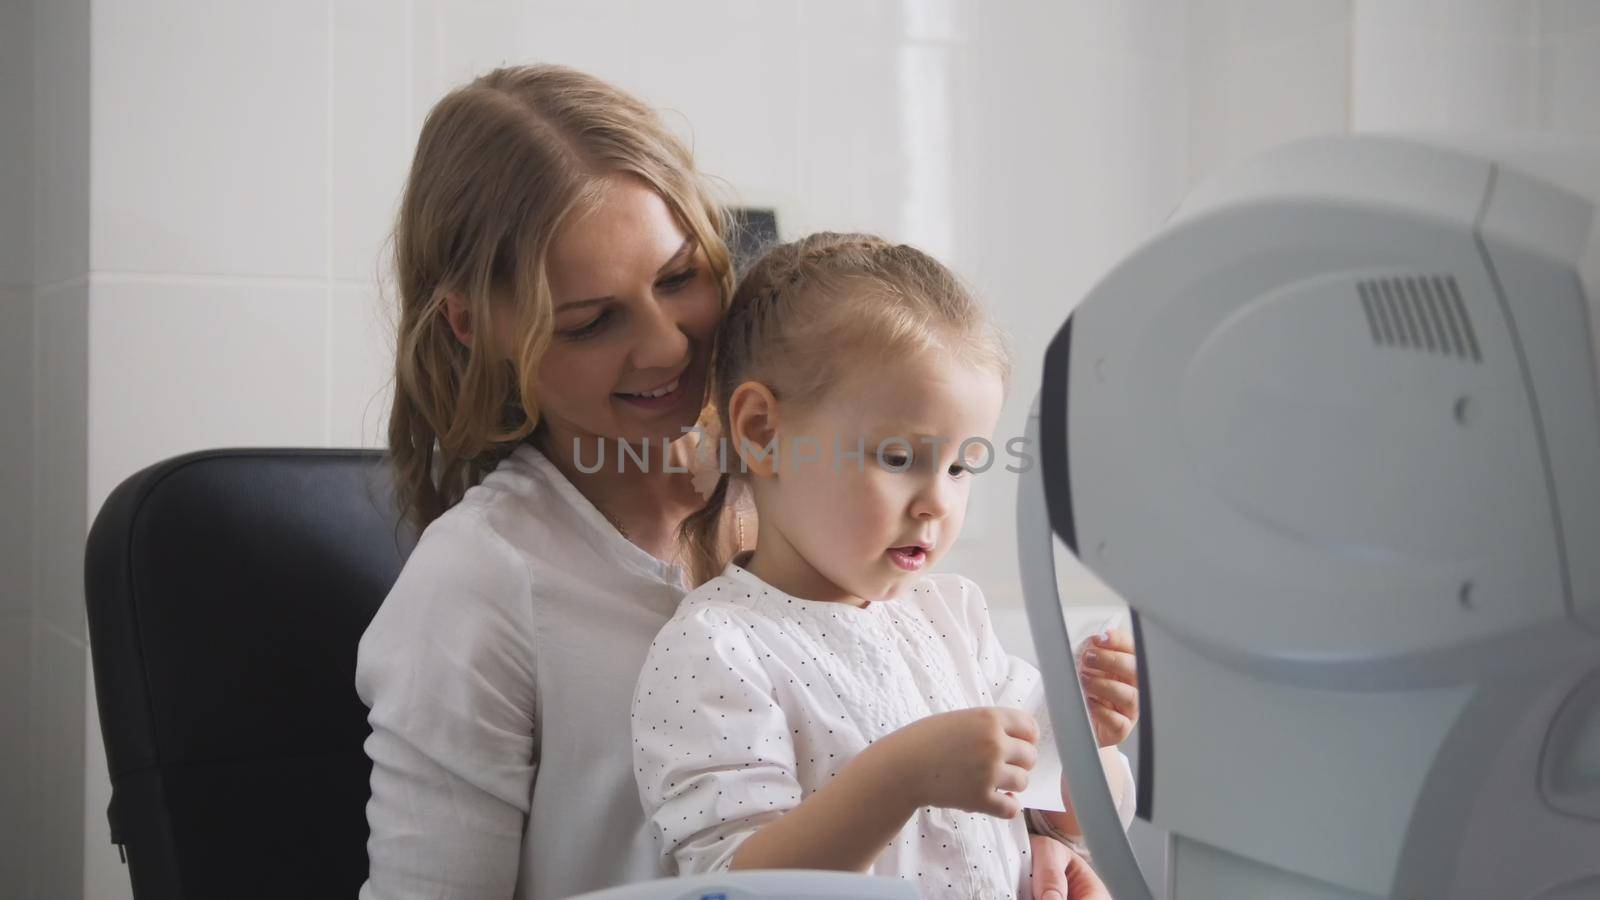 Optometrist checks child's eyesight - mother and child in ophthalmologist room, horizontal